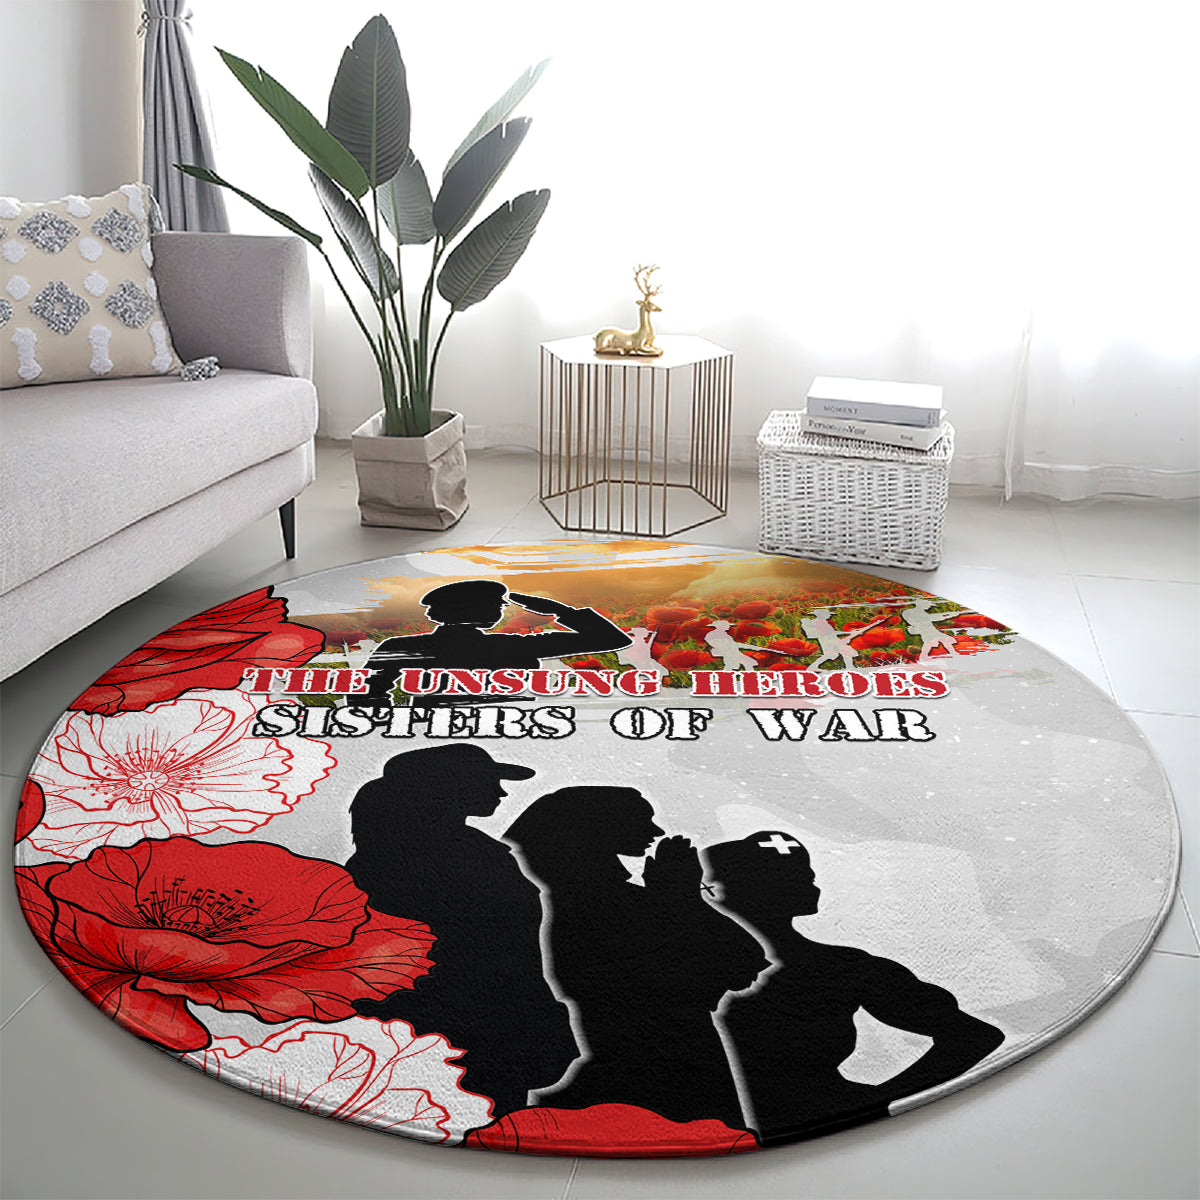 New Zealand ANZAC Day Round Carpet The Unsung Heroes Sisters of War